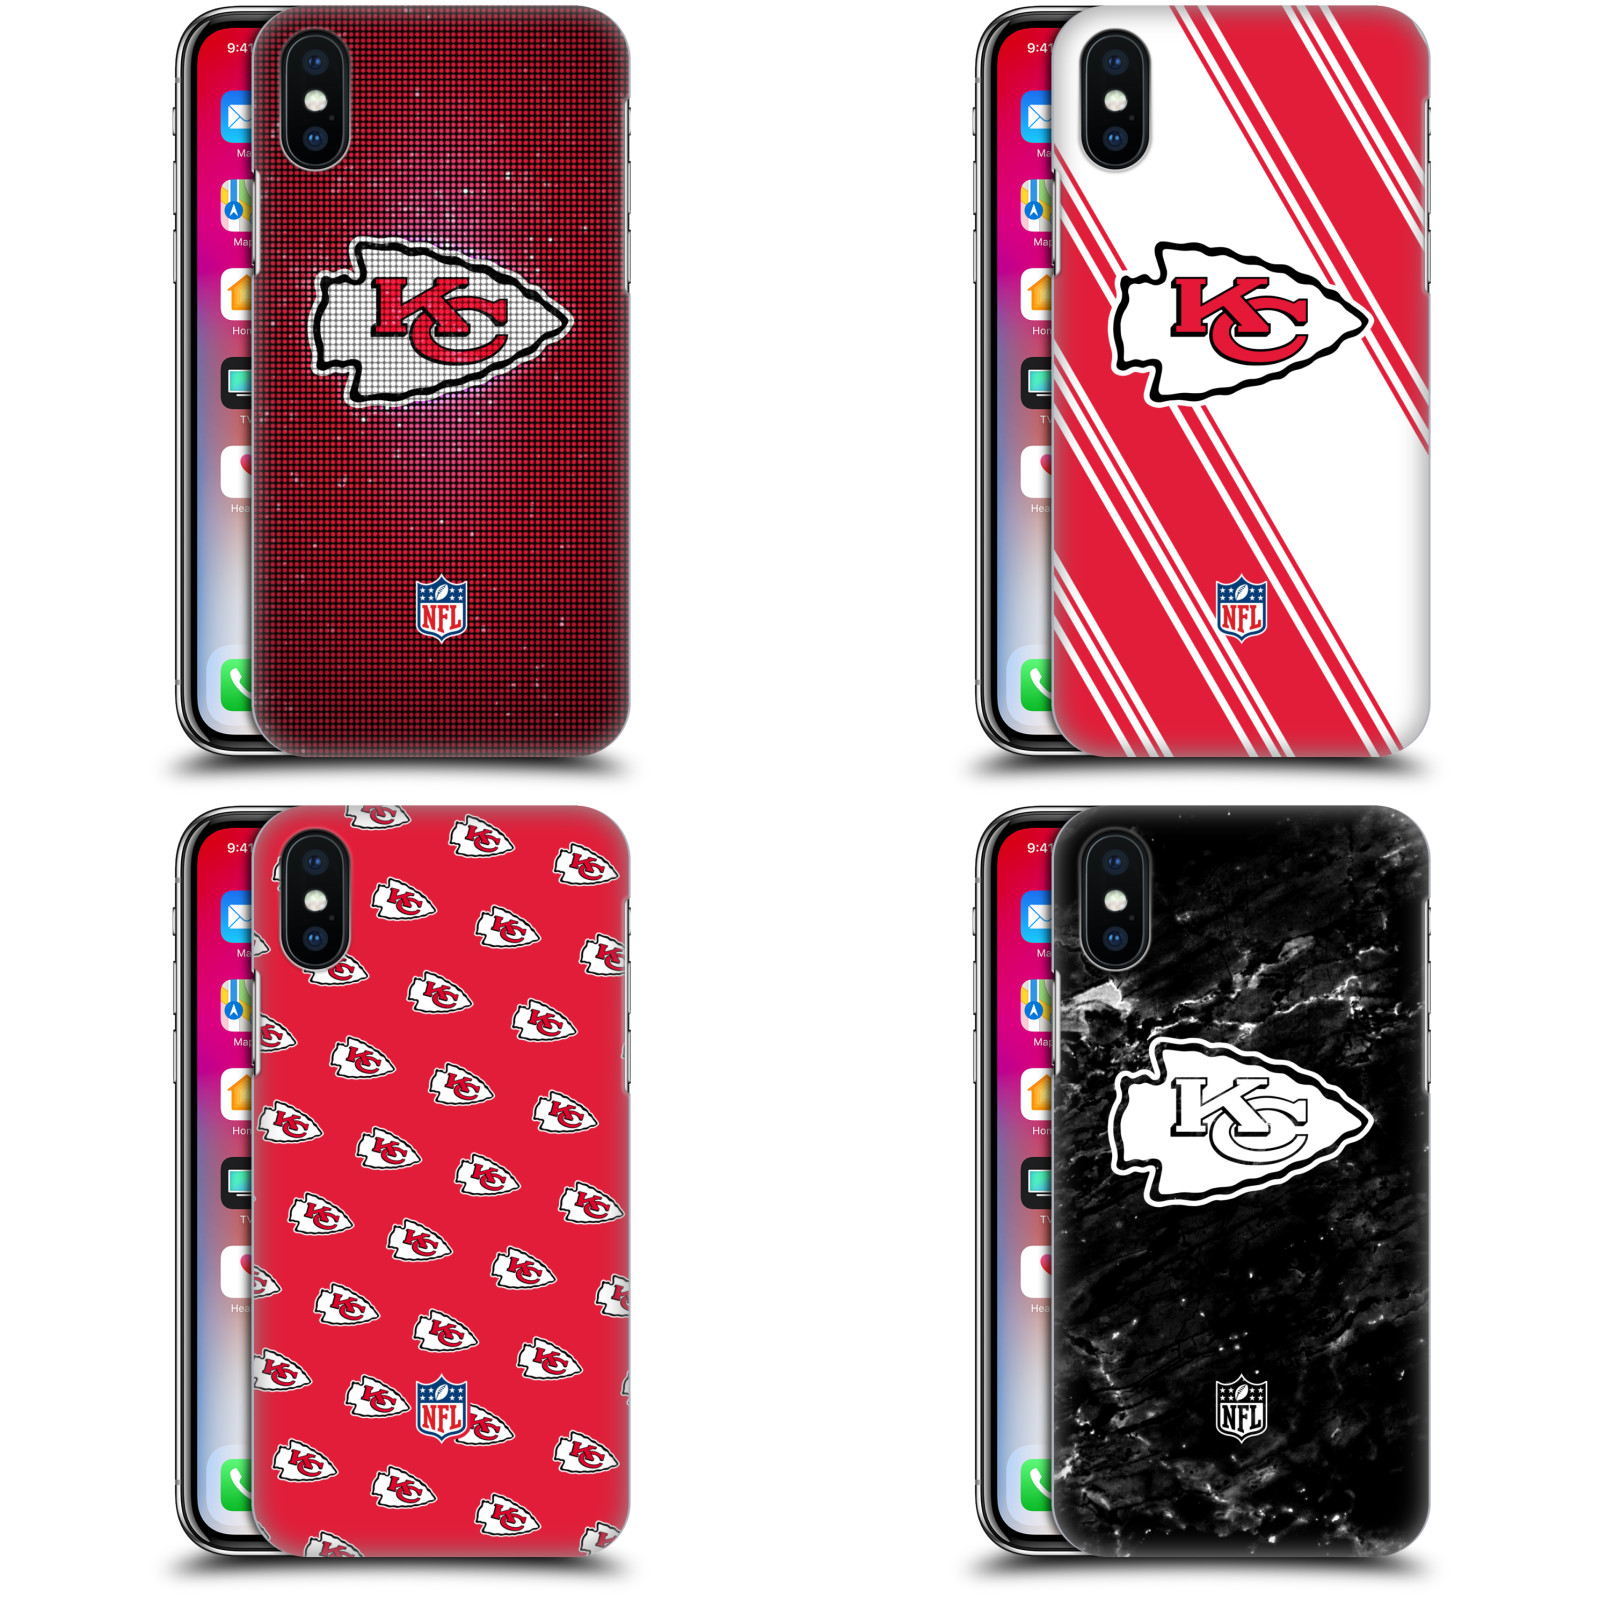 OFFICIAL NFL 2017/18 KANSAS CITY CHIEFS HARD BACK CASE FOR APPLE iPHONE